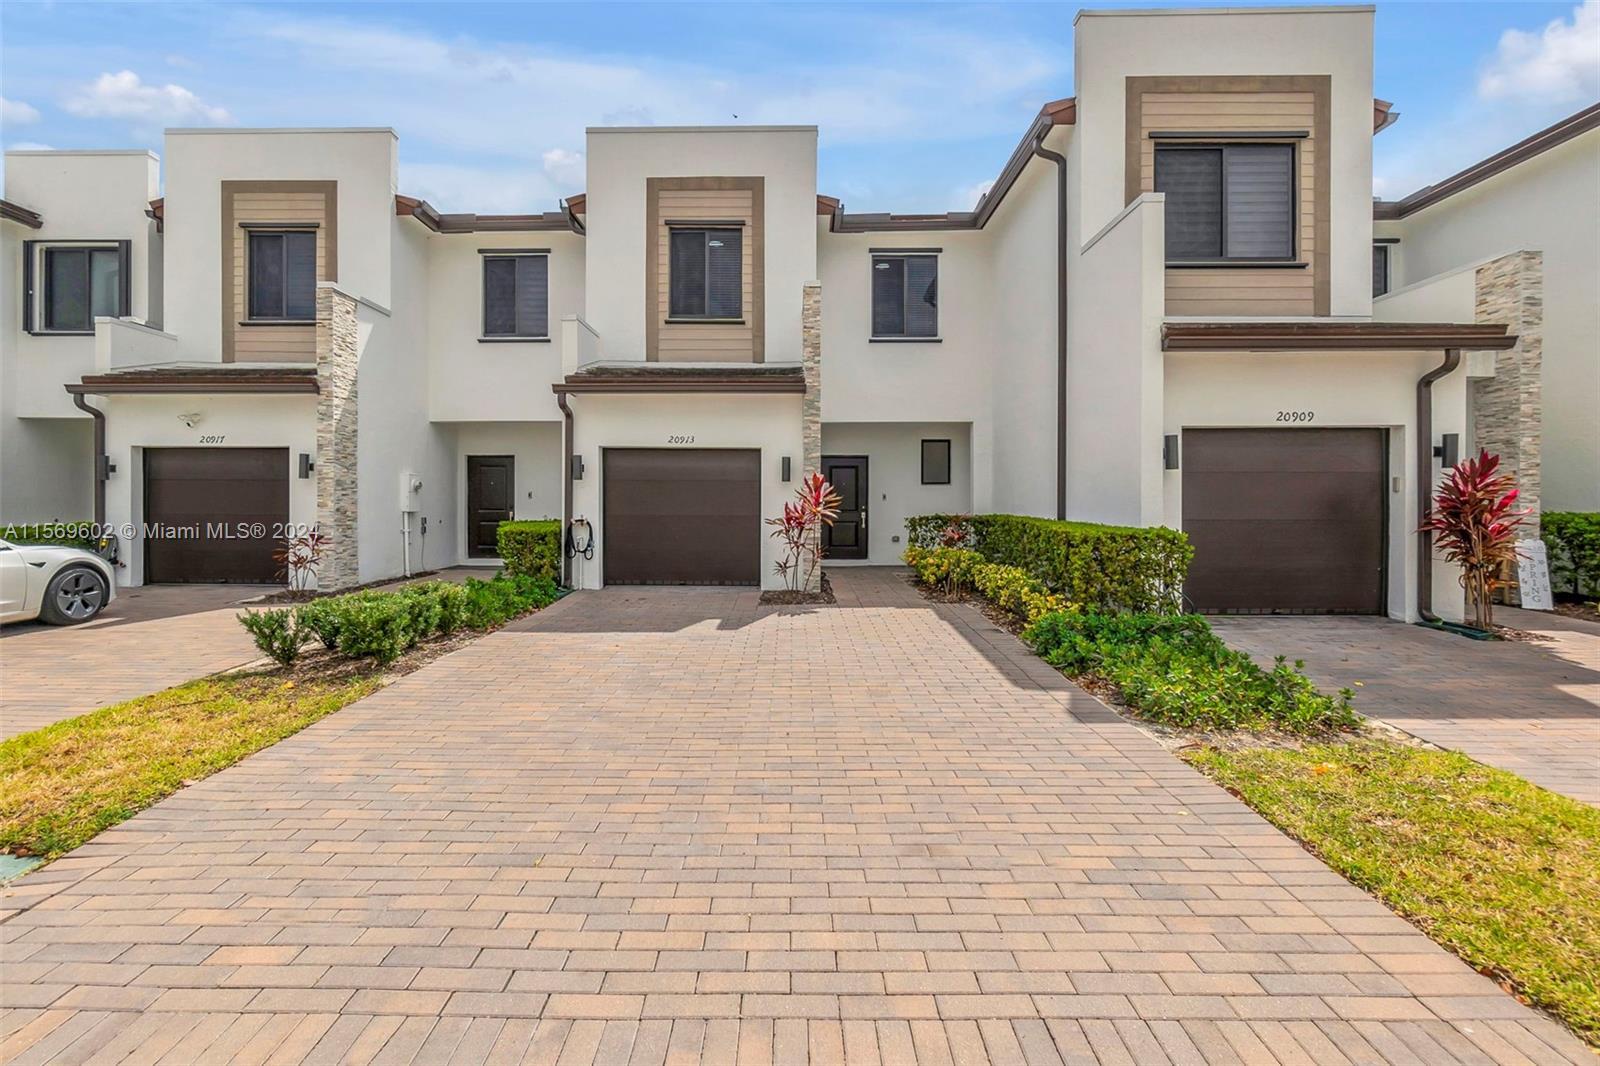 Newly built in 2021 Townhouse and situated within the prestigious Vistas at Via Ventura Community. F